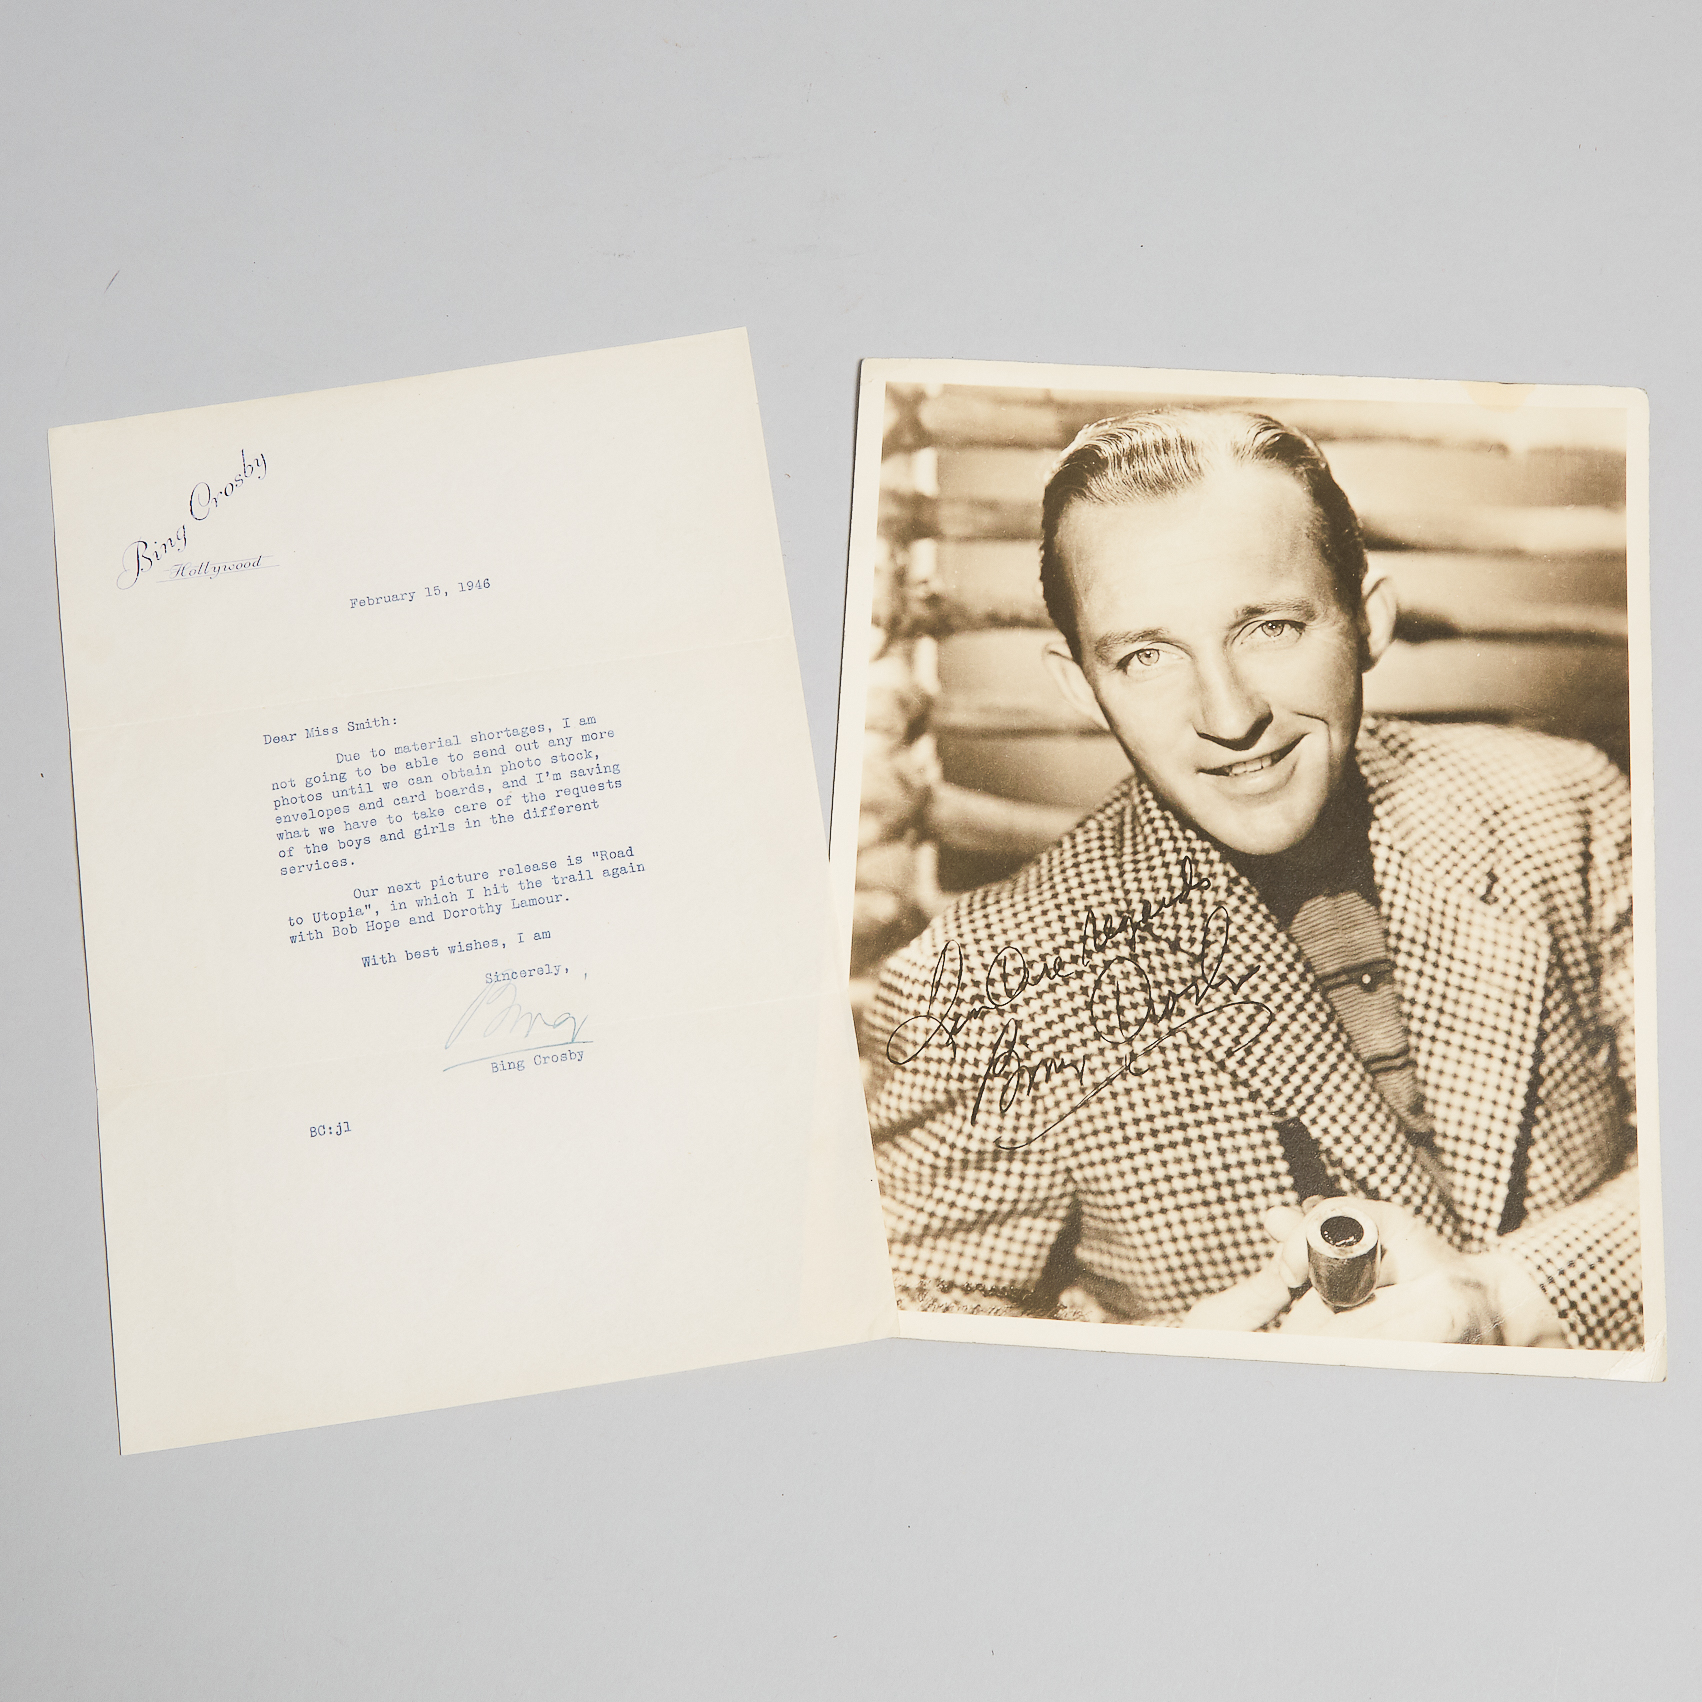 Bing Crosby Autograph Letter, 1946